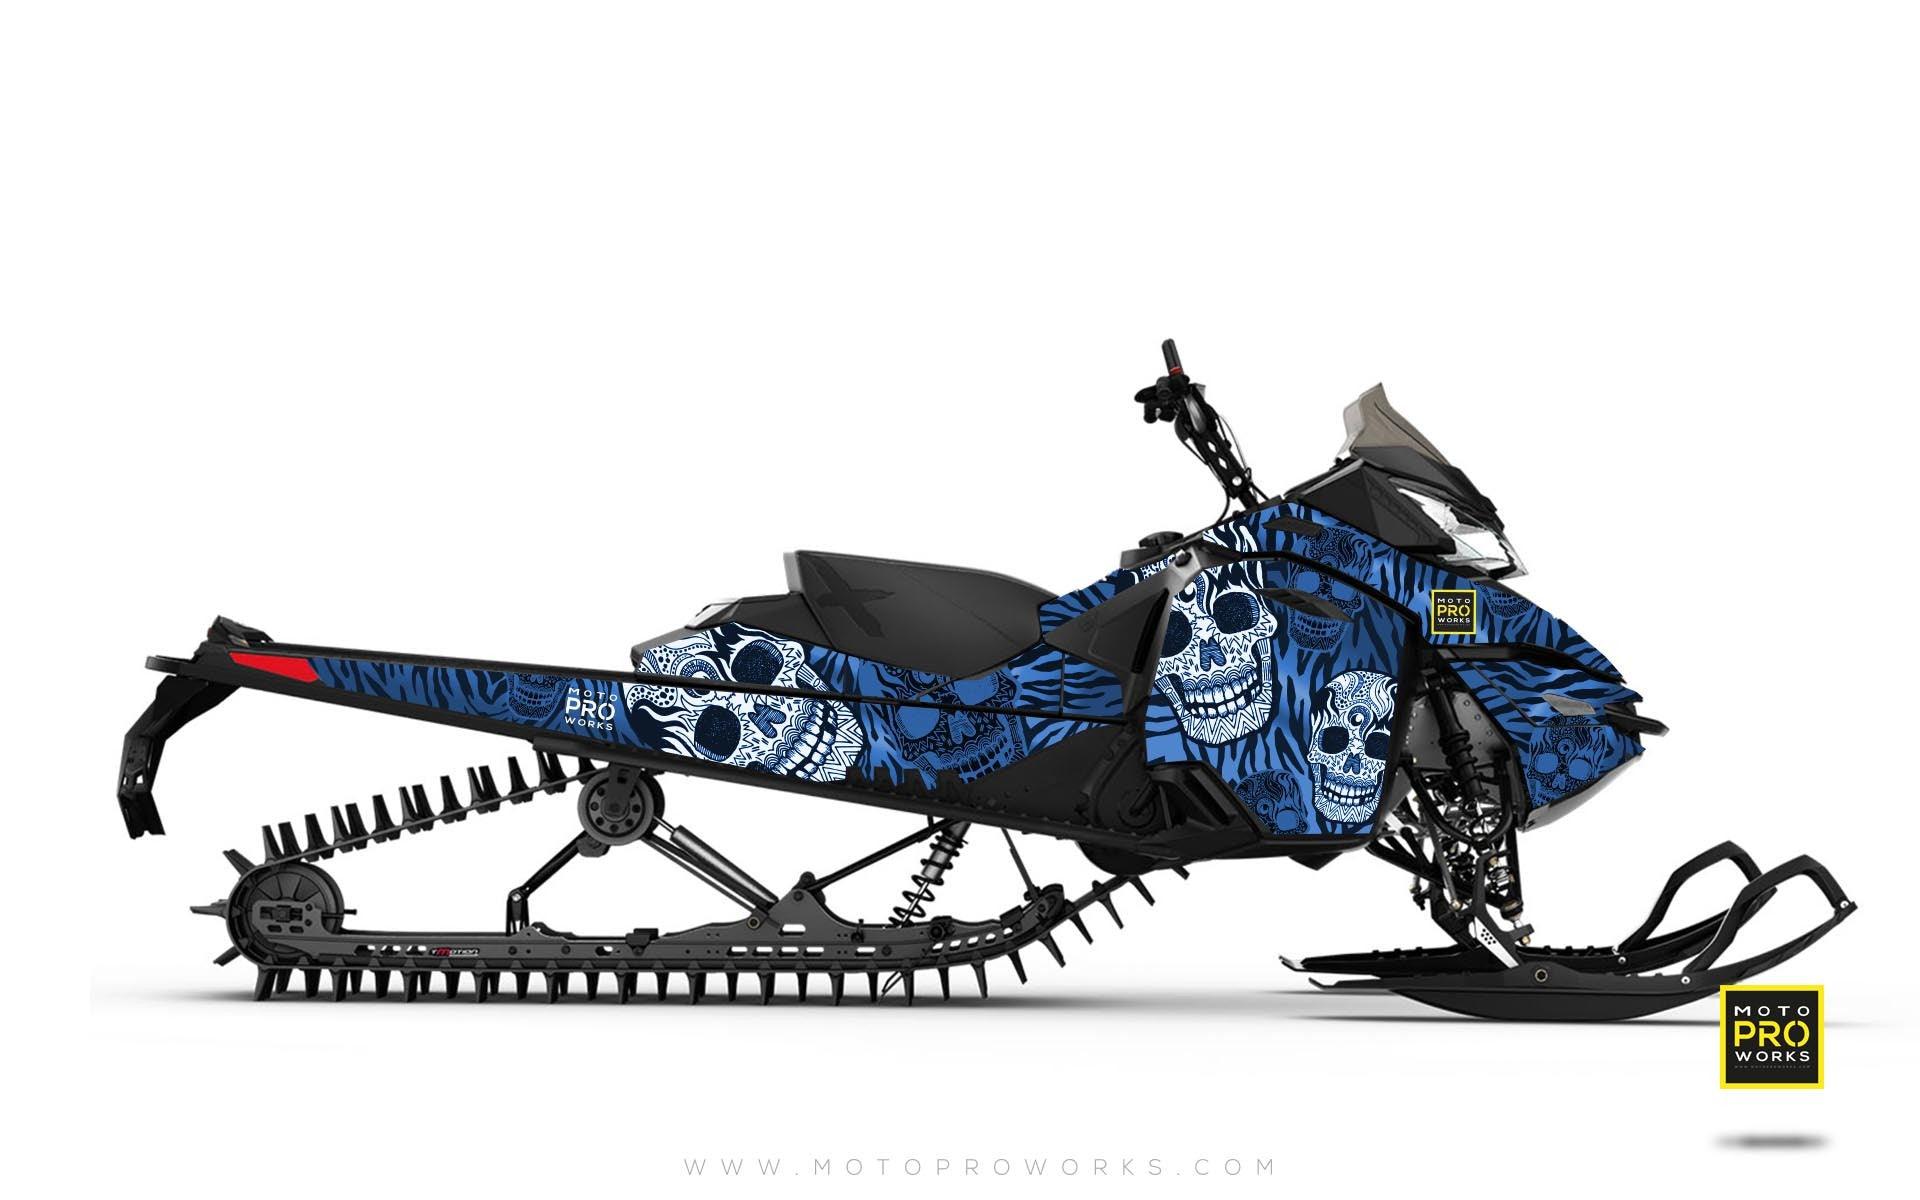 Ski-Doo Graphics - "Fiesta" (blue solid) - MotoProWorks | Decals and Bike Graphic kit